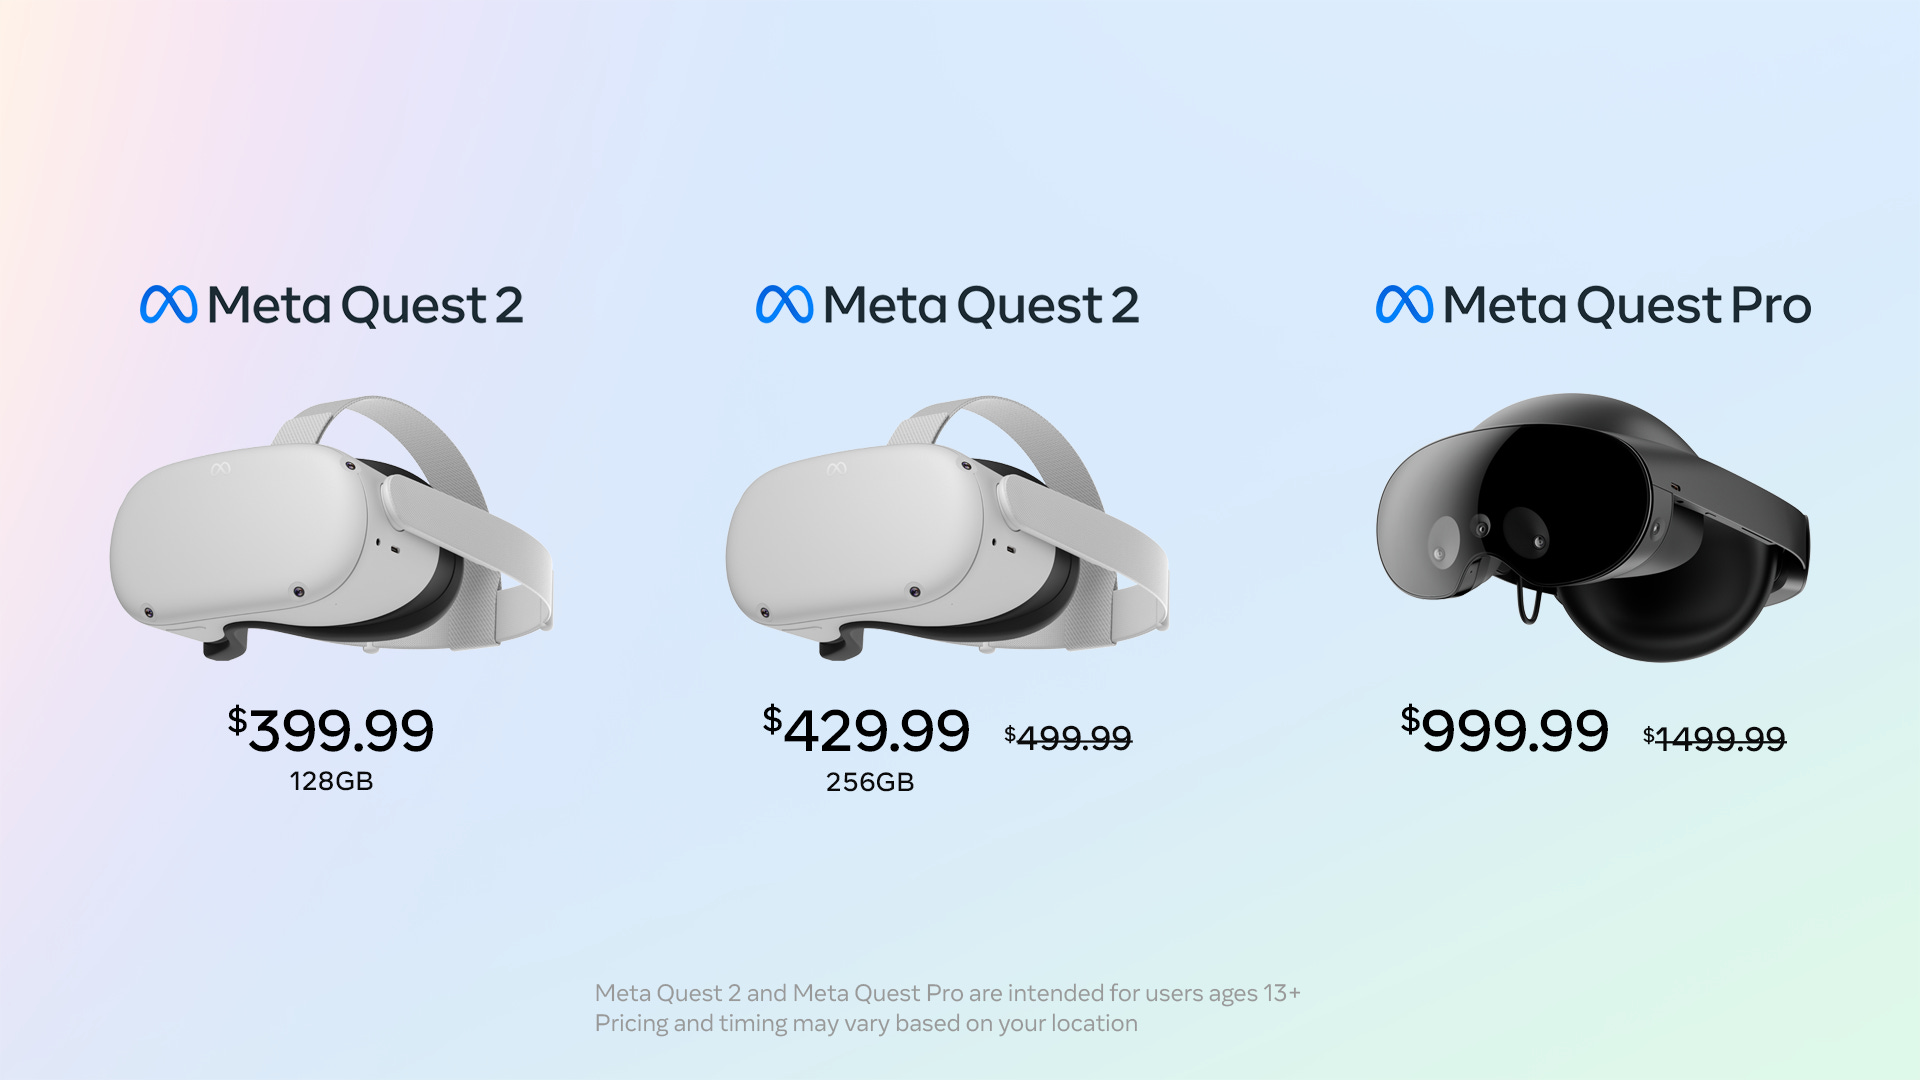 Quest Pro Specs, Price, & Release Date Revealed